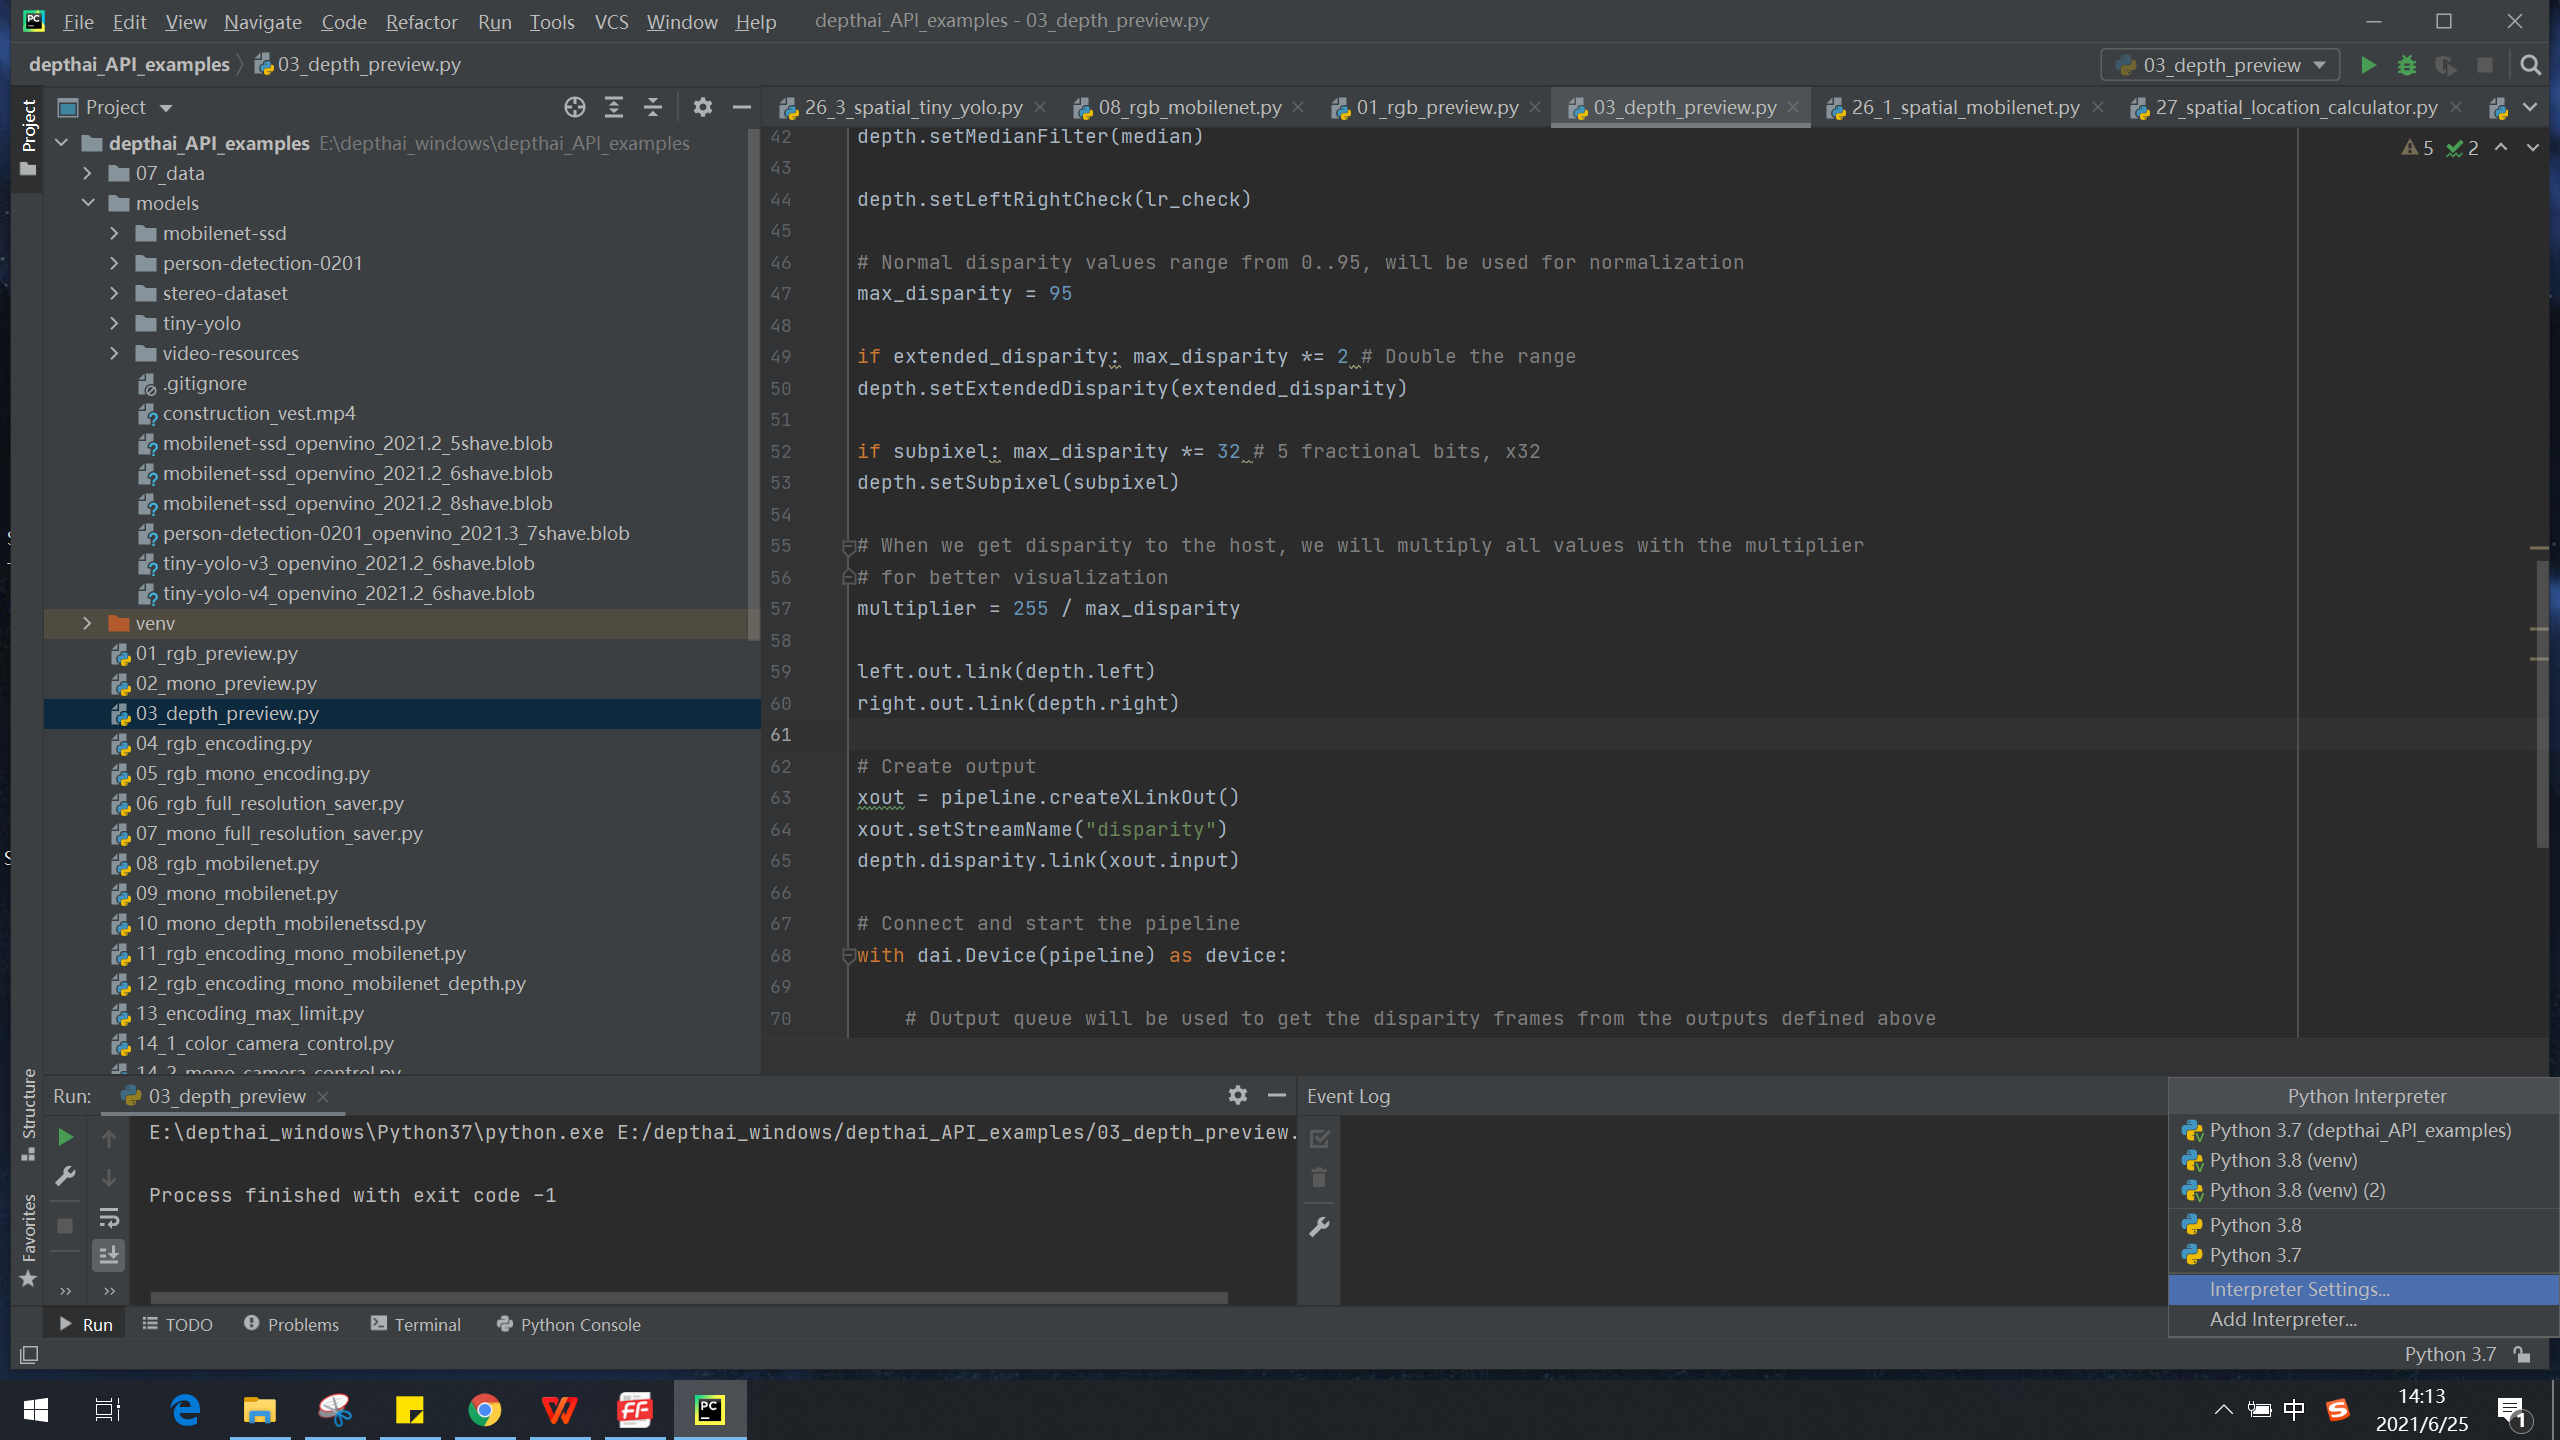 ../_images/pycharm3.png